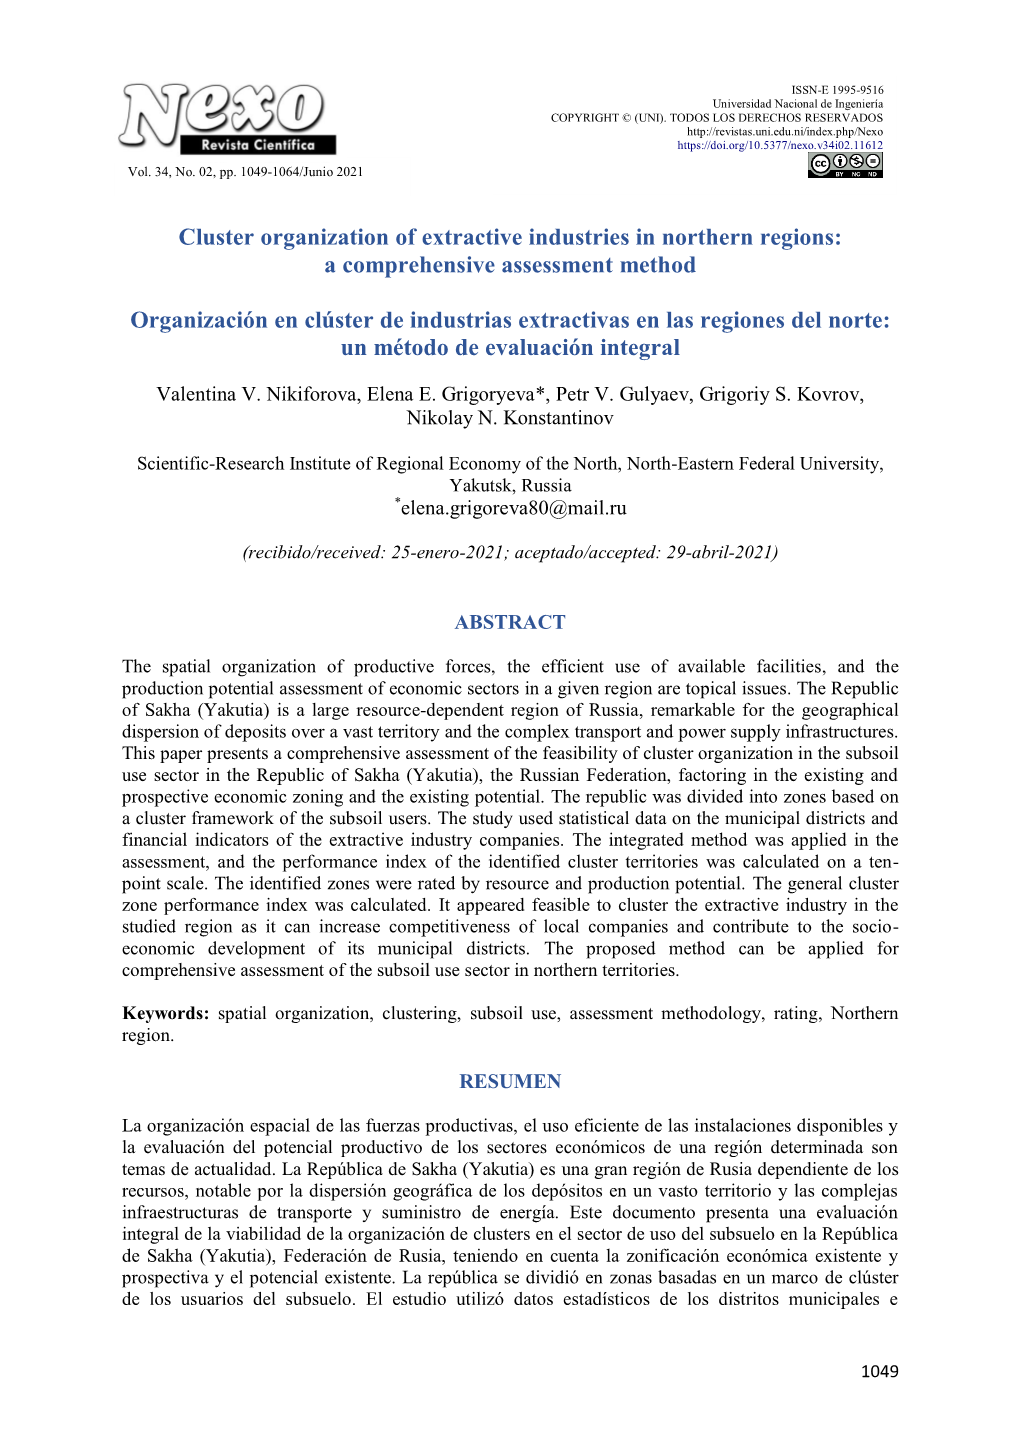 Cluster Organization of Extractive Industries in Northern Regions: a Comprehensive Assessment Method